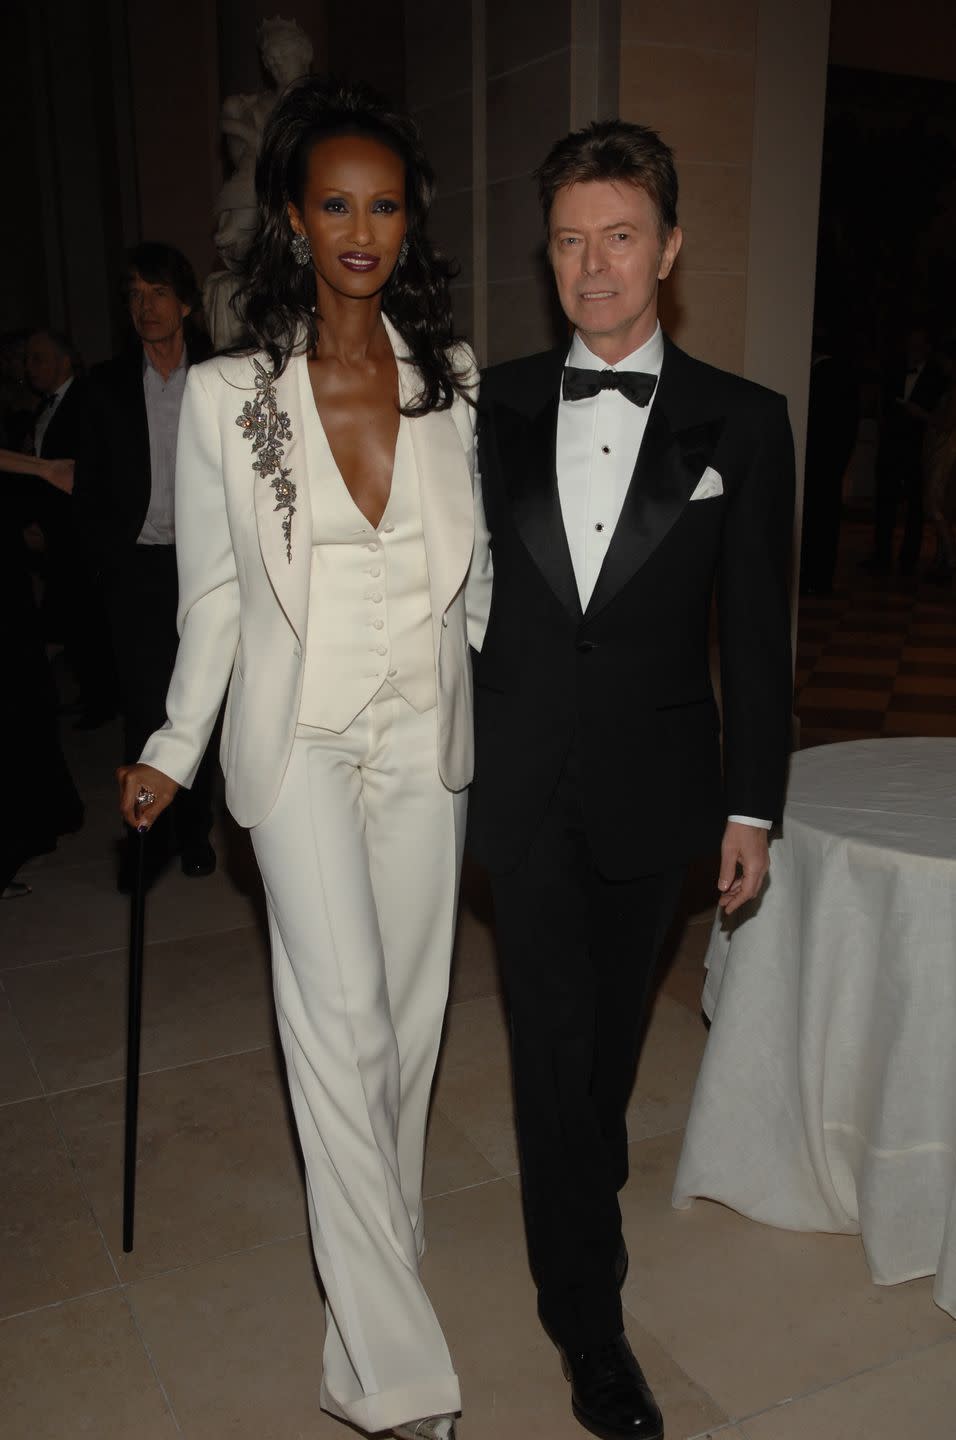 model iman, left, and musician david bowie attend the metropolitan museum of arts annual costume institute gala in new york city iman wears custom stella mccartney and fred leighton jewelry photo by fairchild archivepenske media via getty images